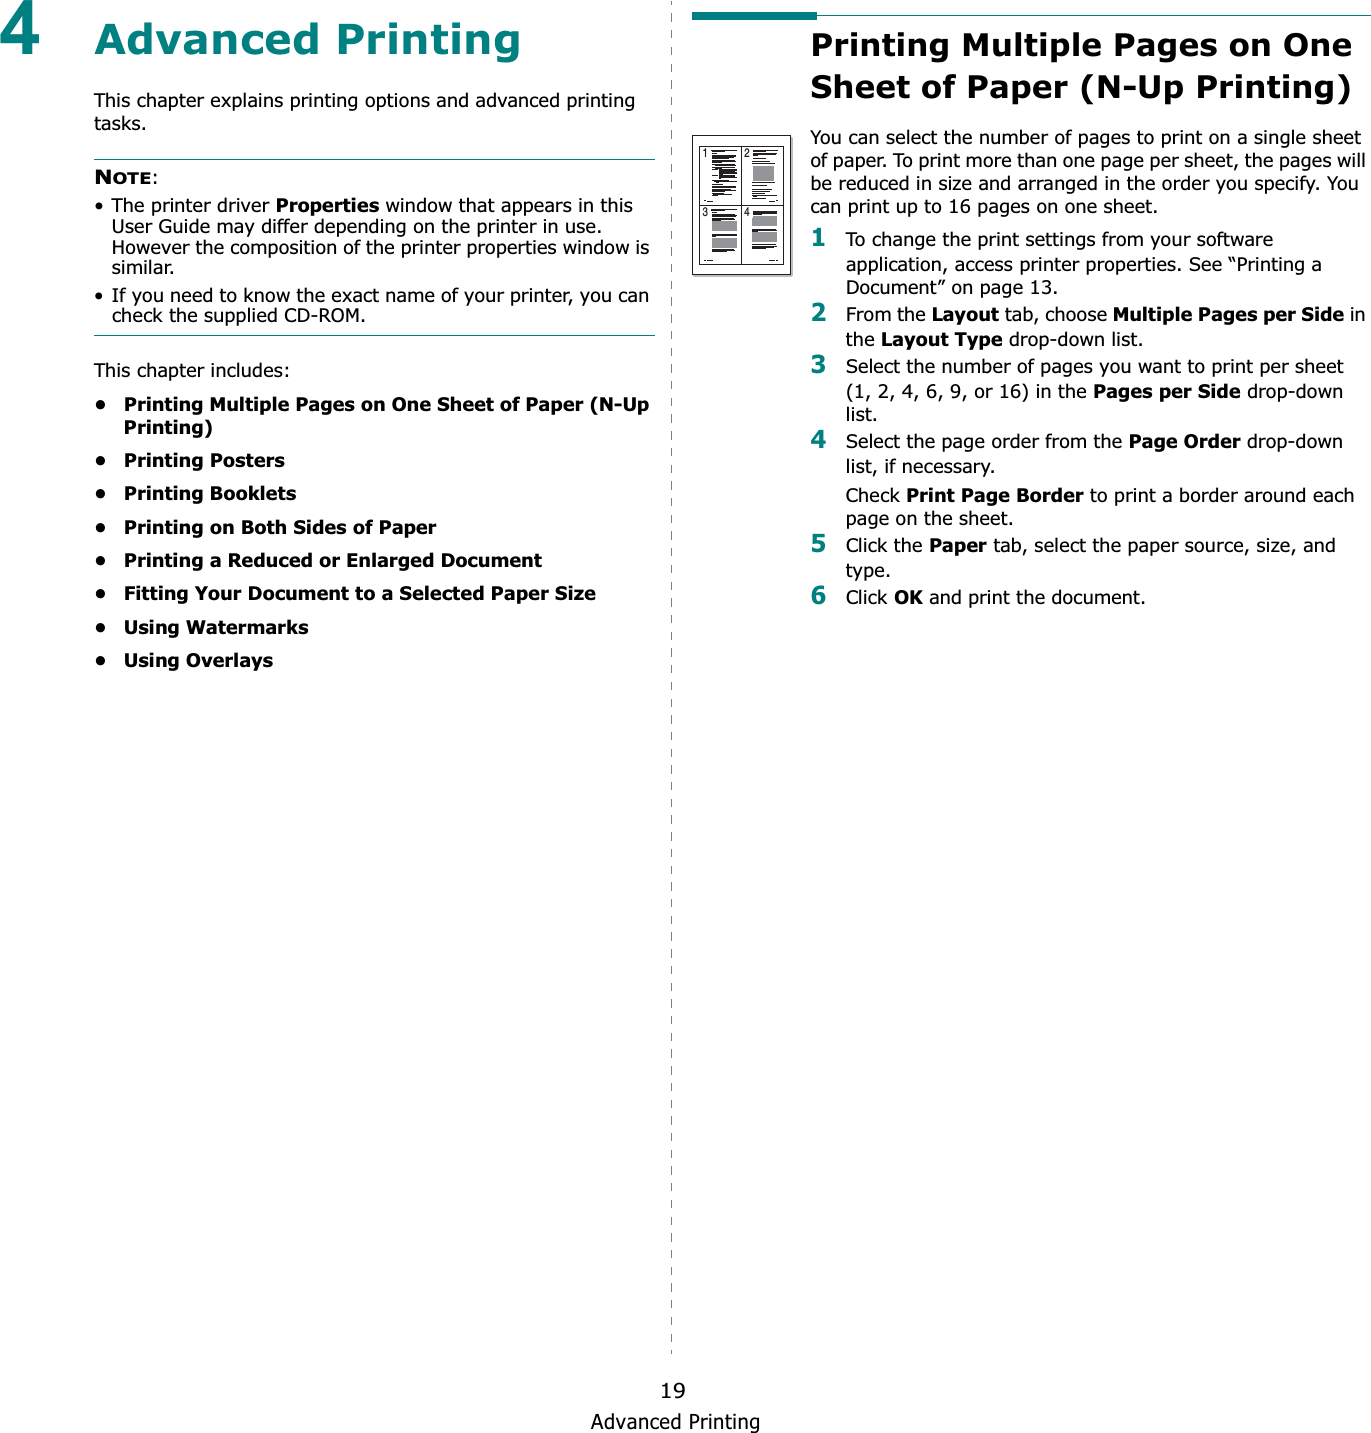 Advanced Printing194Advanced PrintingThis chapter explains printing options and advanced printing tasks. NOTE:• The printer driver Properties window that appears in this User Guide may differ depending on the printer in use. However the composition of the printer properties window is similar.• If you need to know the exact name of your printer, you can check the supplied CD-ROM.This chapter includes:• Printing Multiple Pages on One Sheet of Paper (N-Up Printing)•Printing Posters• Printing Booklets• Printing on Both Sides of Paper• Printing a Reduced or Enlarged Document• Fitting Your Document to a Selected Paper Size•Using Watermarks•Using OverlaysPrinting Multiple Pages on One Sheet of Paper (N-Up Printing) You can select the number of pages to print on a single sheet of paper. To print more than one page per sheet, the pages will be reduced in size and arranged in the order you specify. You can print up to 16 pages on one sheet.  1To change the print settings from your software application, access printer properties. See “Printing a Document” on page 13.2From the Layout tab, choose Multiple Pages per Side in the Layout Type drop-down list. 3Select the number of pages you want to print per sheet (1, 2, 4, 6, 9, or 16) in the Pages per Side drop-down list.4Select the page order from the Page Order drop-down list, if necessary.Check Print Page Border to print a border around each page on the sheet. 5Click the Paper tab, select the paper source, size, and type.6Click OK and print the document. 1 23 4